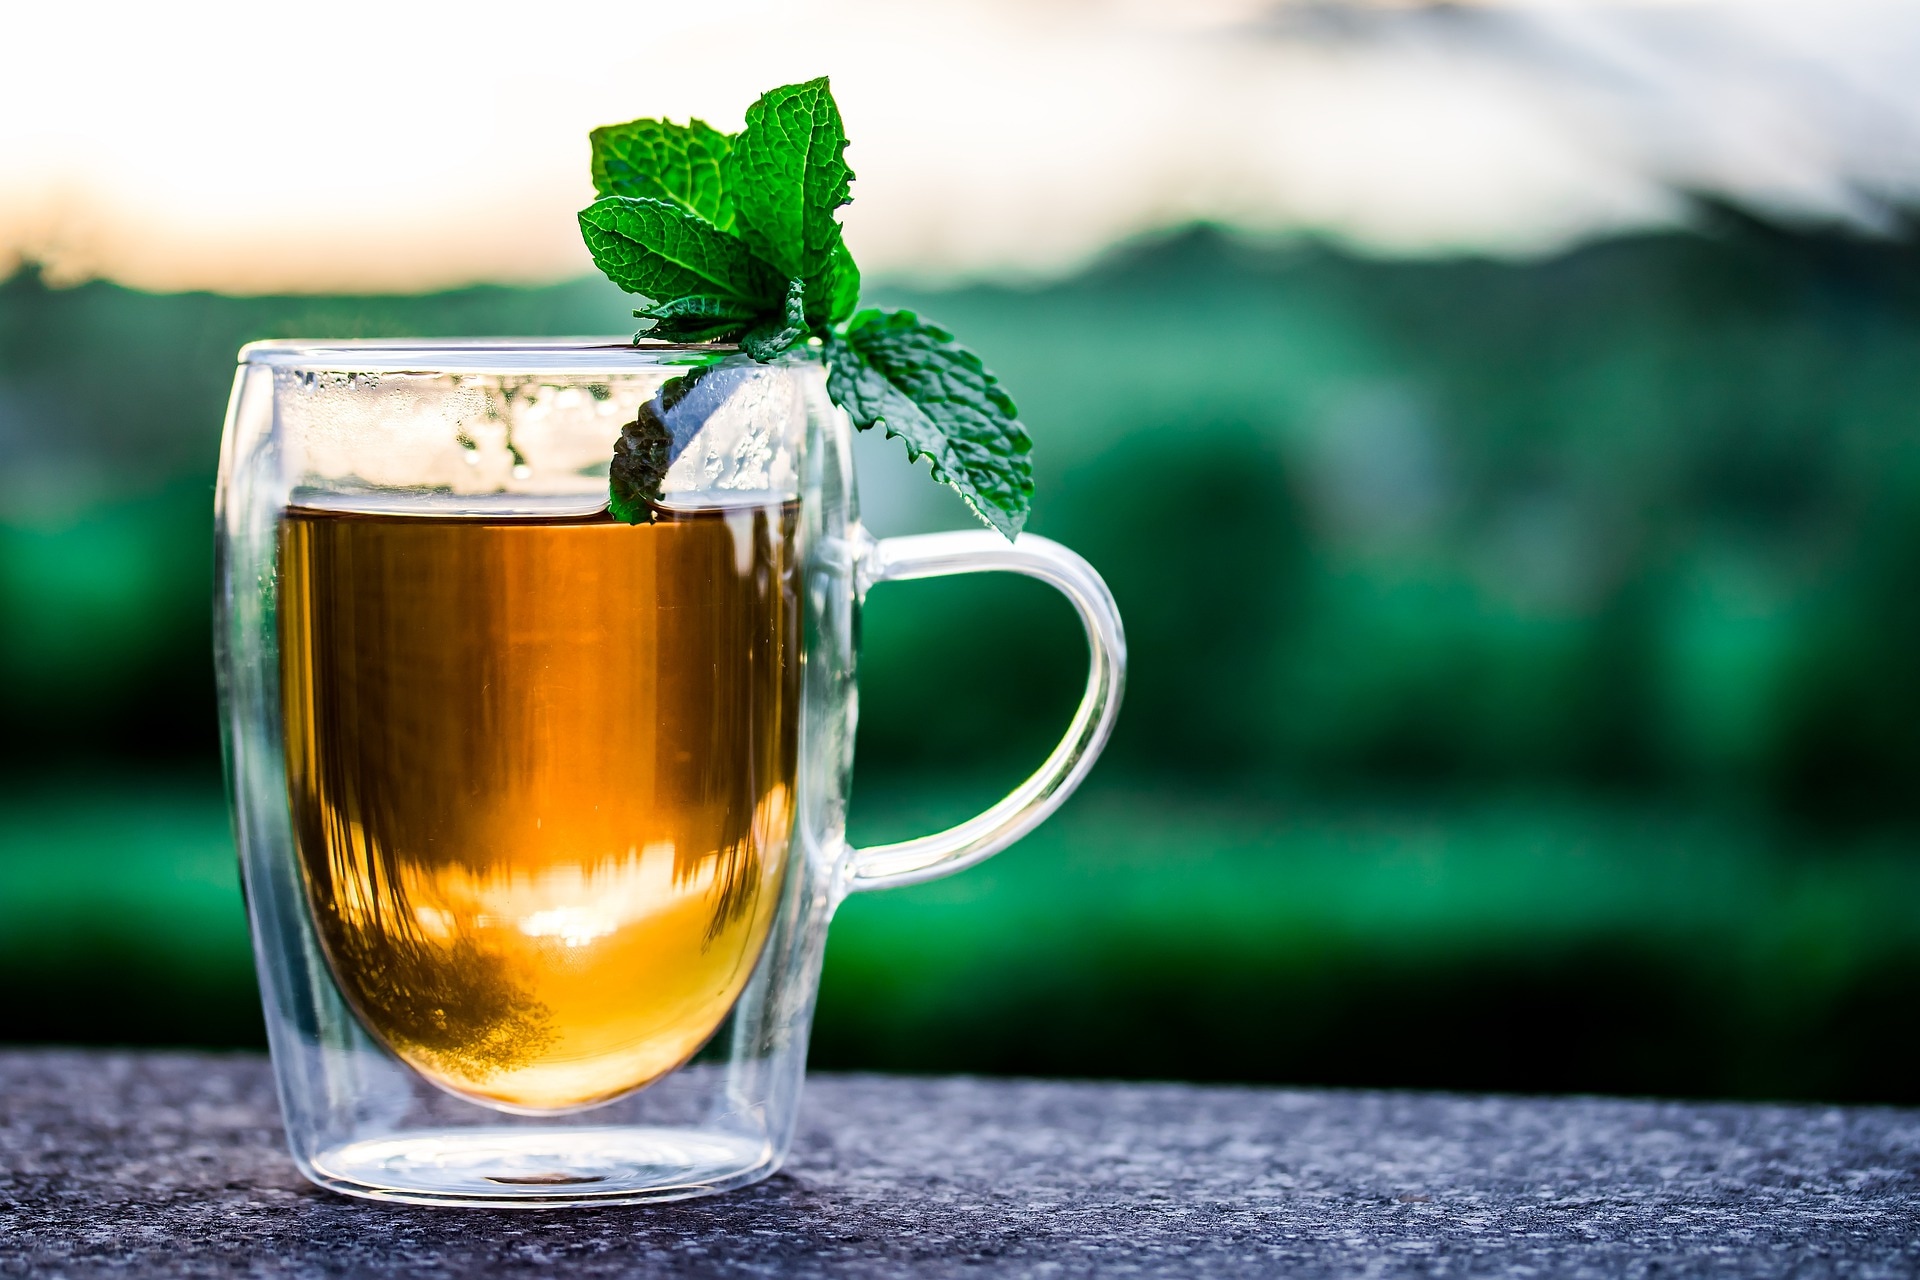 Peppermint tea has a tingling, revitalising flavour that could aid in gently clearing blocked sinuses